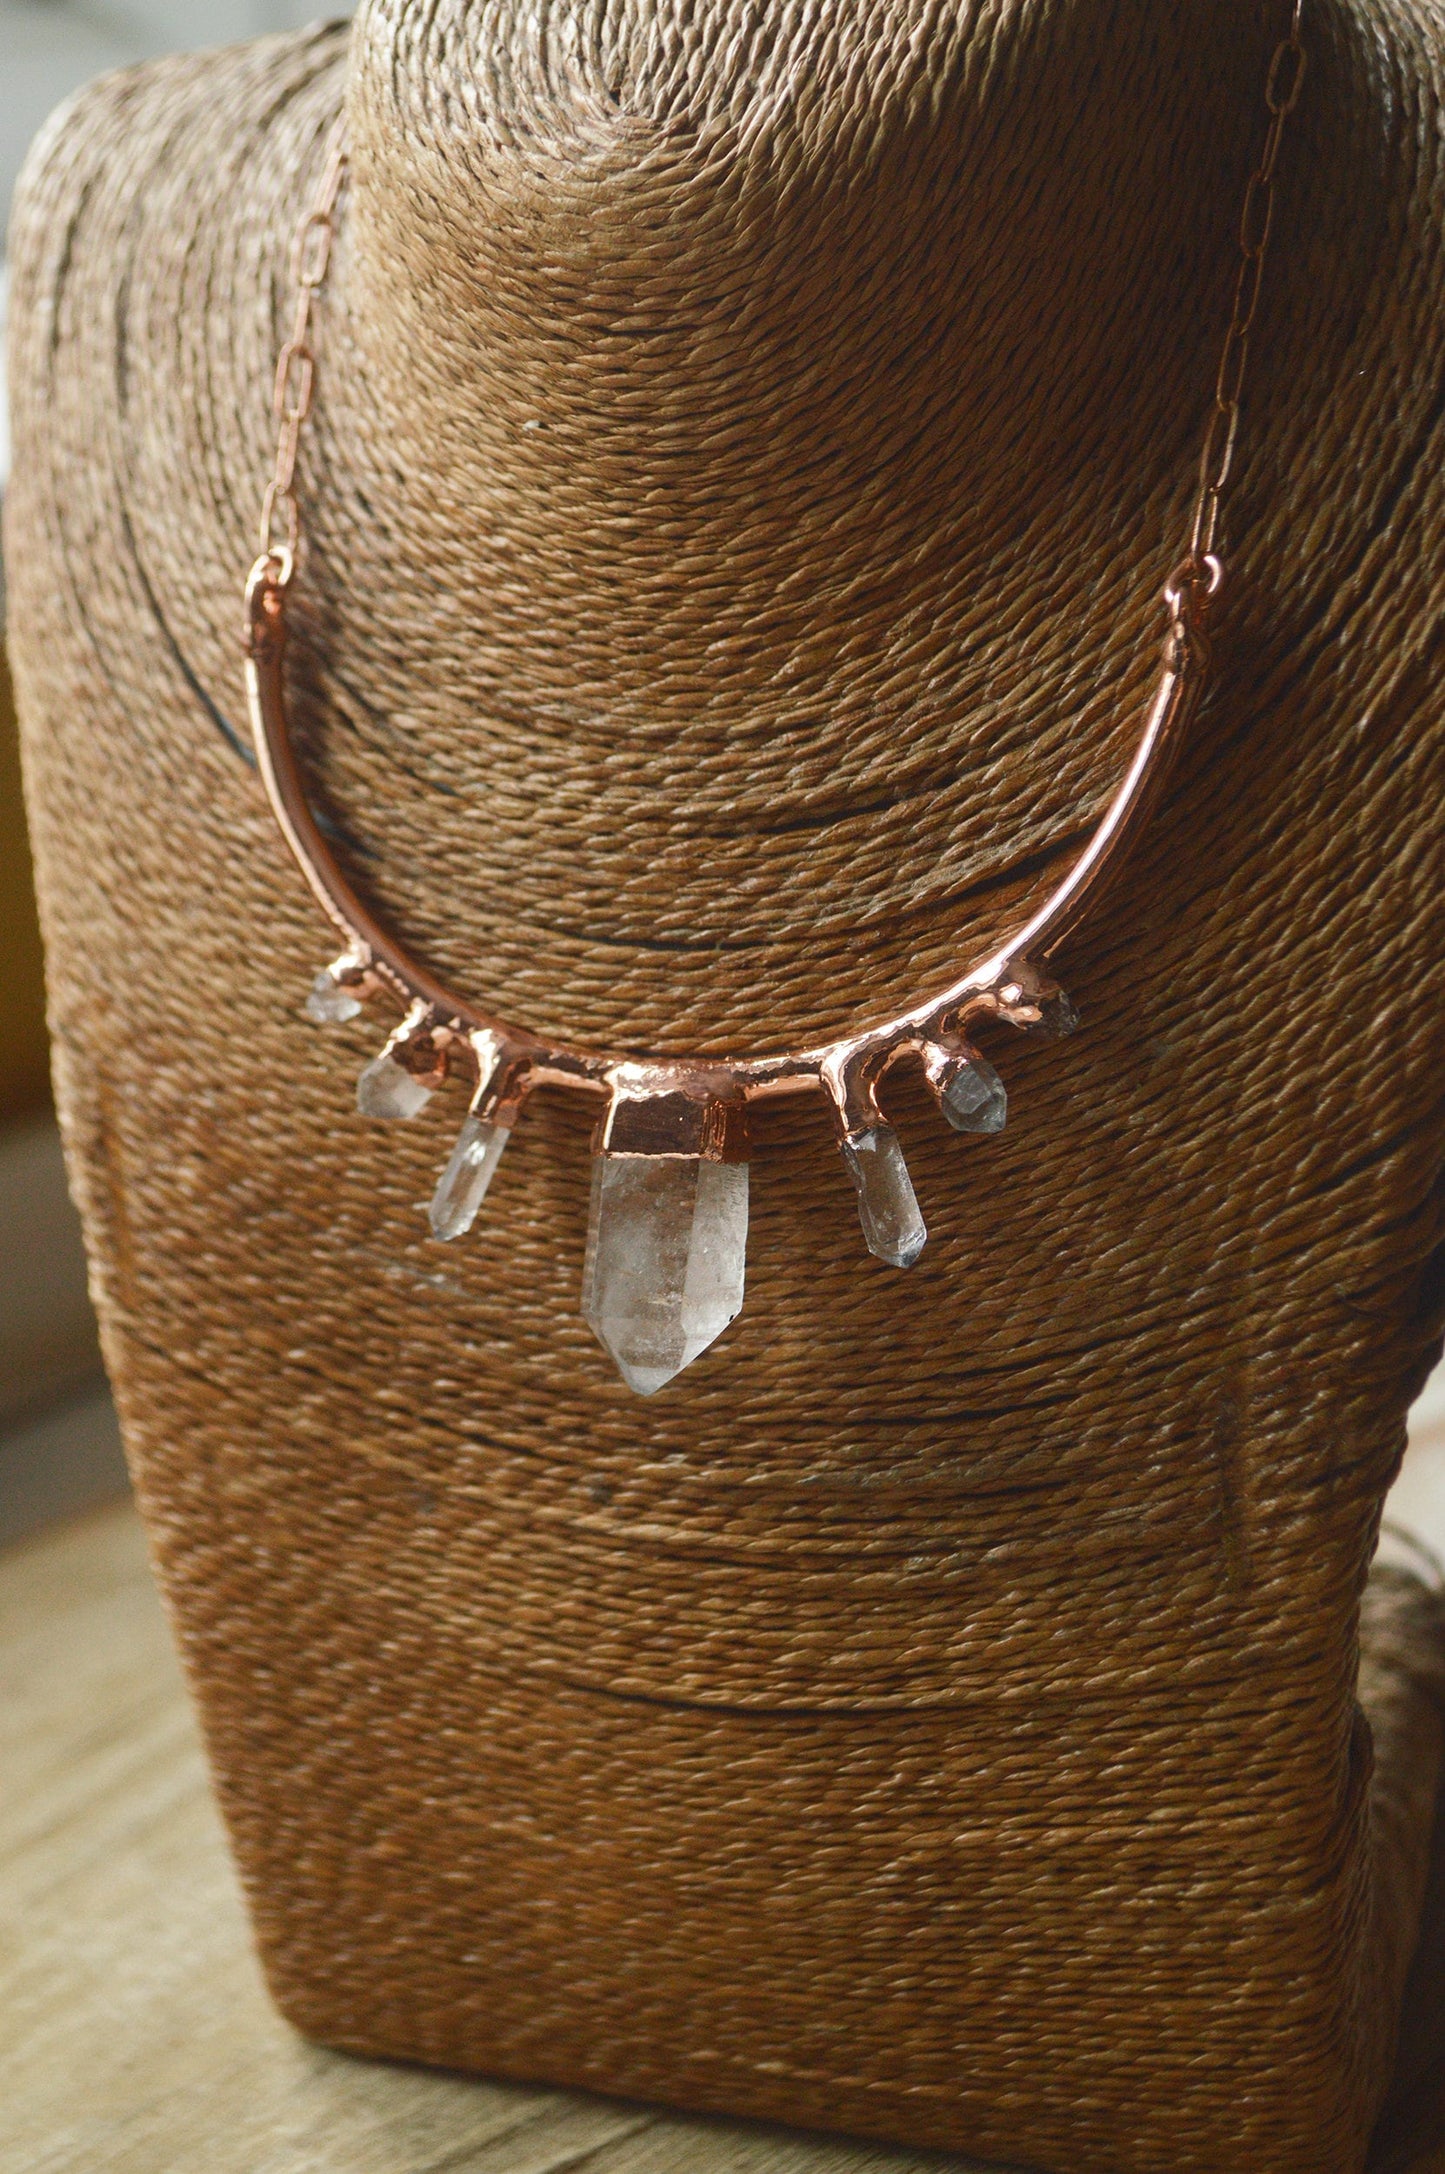 Raw quartz collar, statement necklace with natural crystals